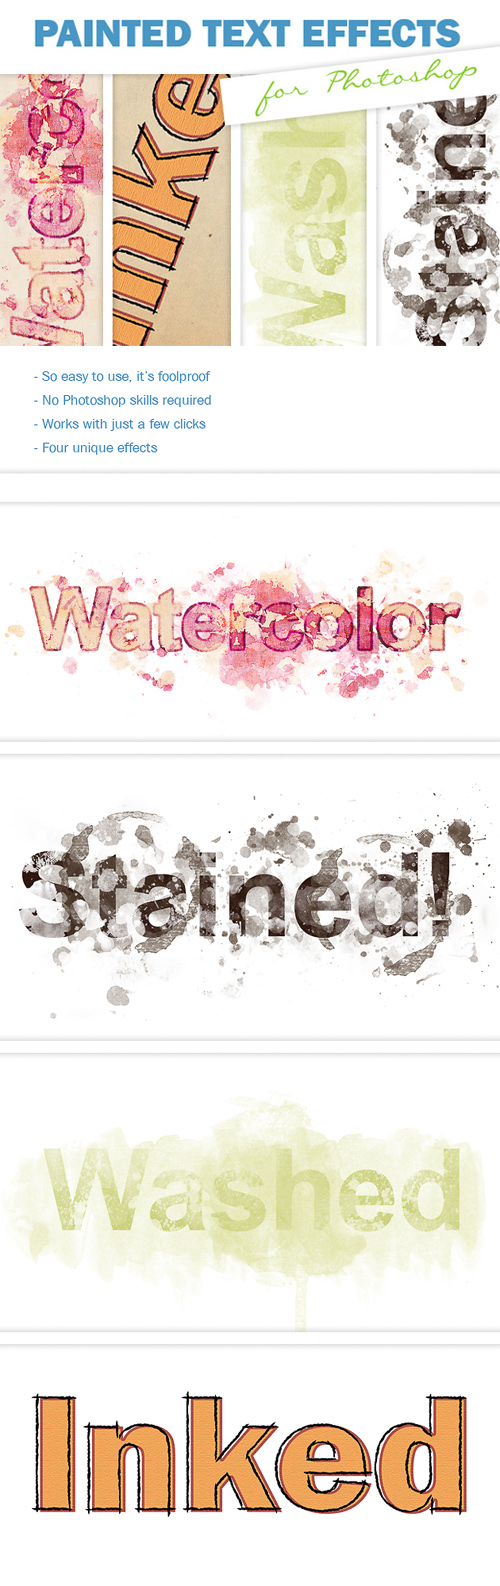 4 Easy to Use Painted Text Effects for Photoshop Worth $10